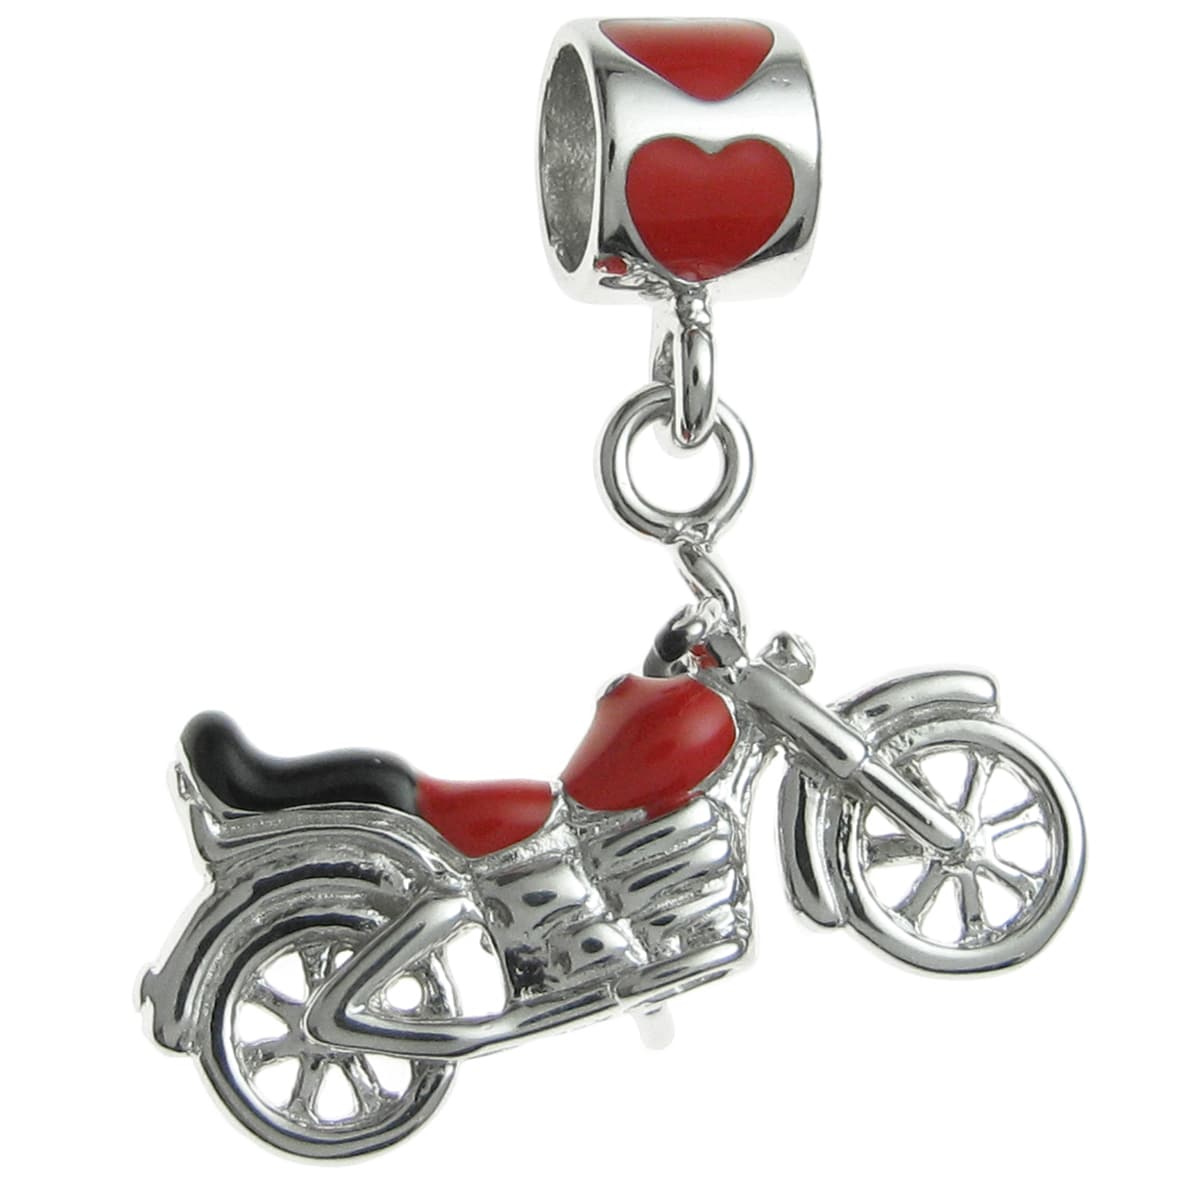 STERLING SILVER PENDANT CHARM SOLID 925 BIKER MOTORCYCLE CHOPPER NEW 